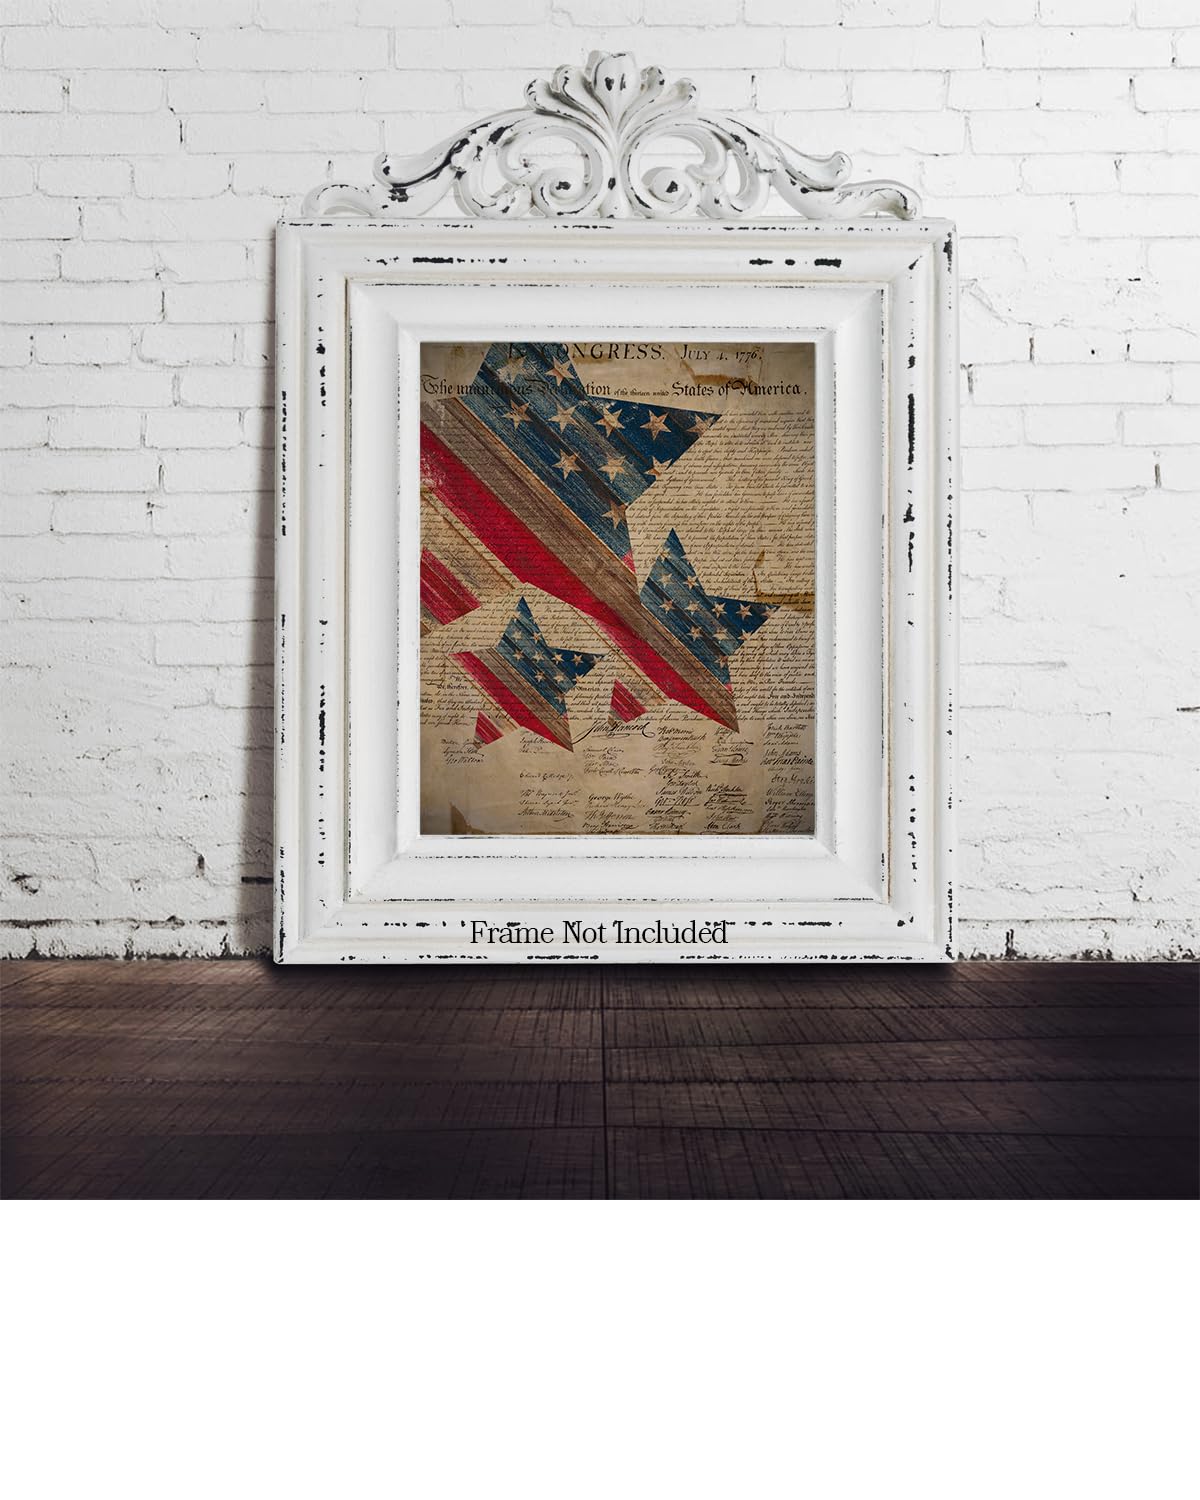 Declaration of Independence Wall Art Canvas - Patriotic Wall Decor - Memorial Day, 4th of July Gift for Americana, US History Buffs, Military Veterans Patriots